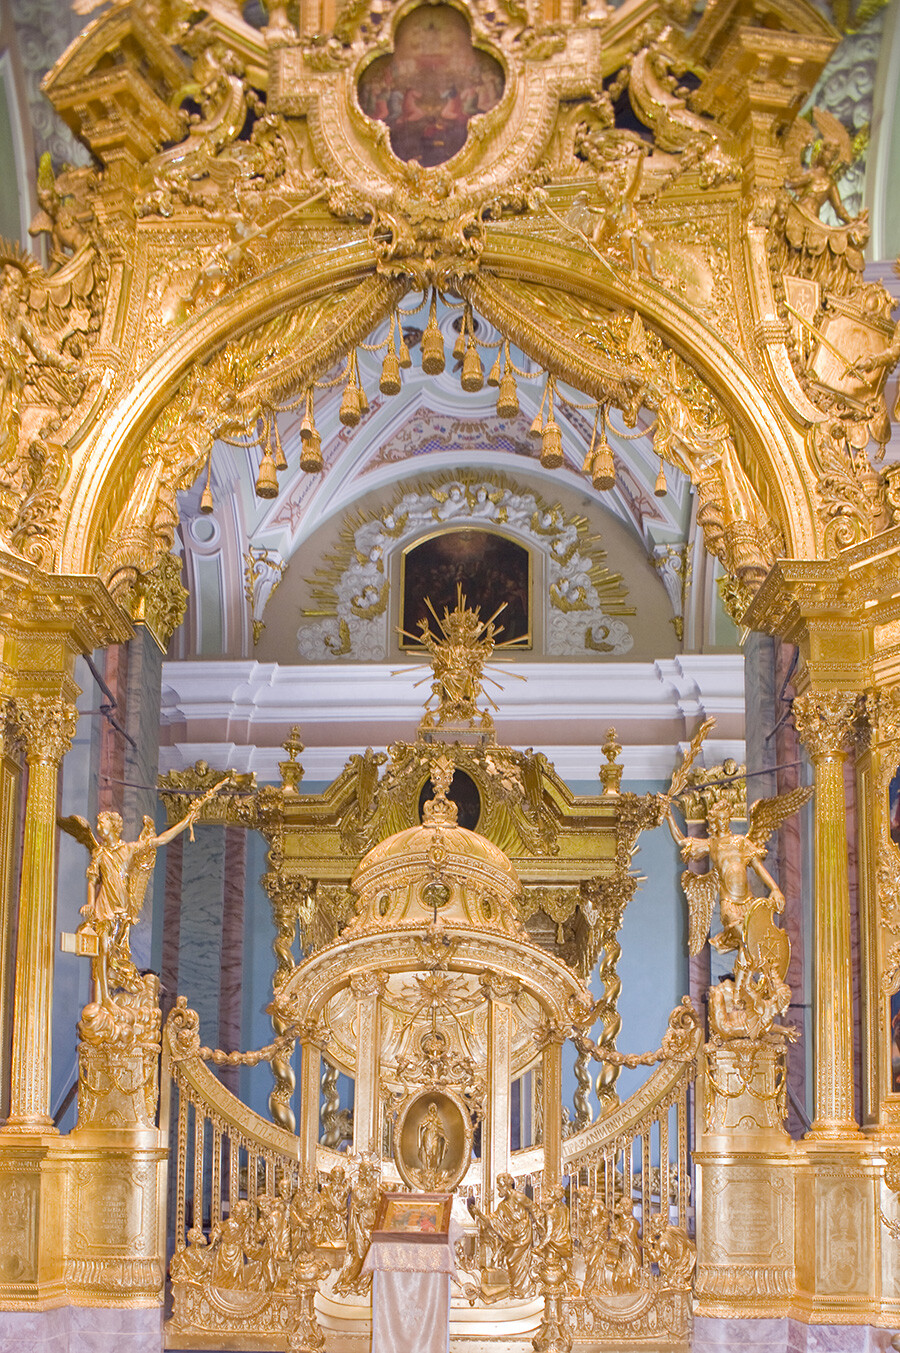 Cathedral of Sts. Peter & Paul. Gilded icon screen with Royal Gate leading to main altar. June 7, 2015